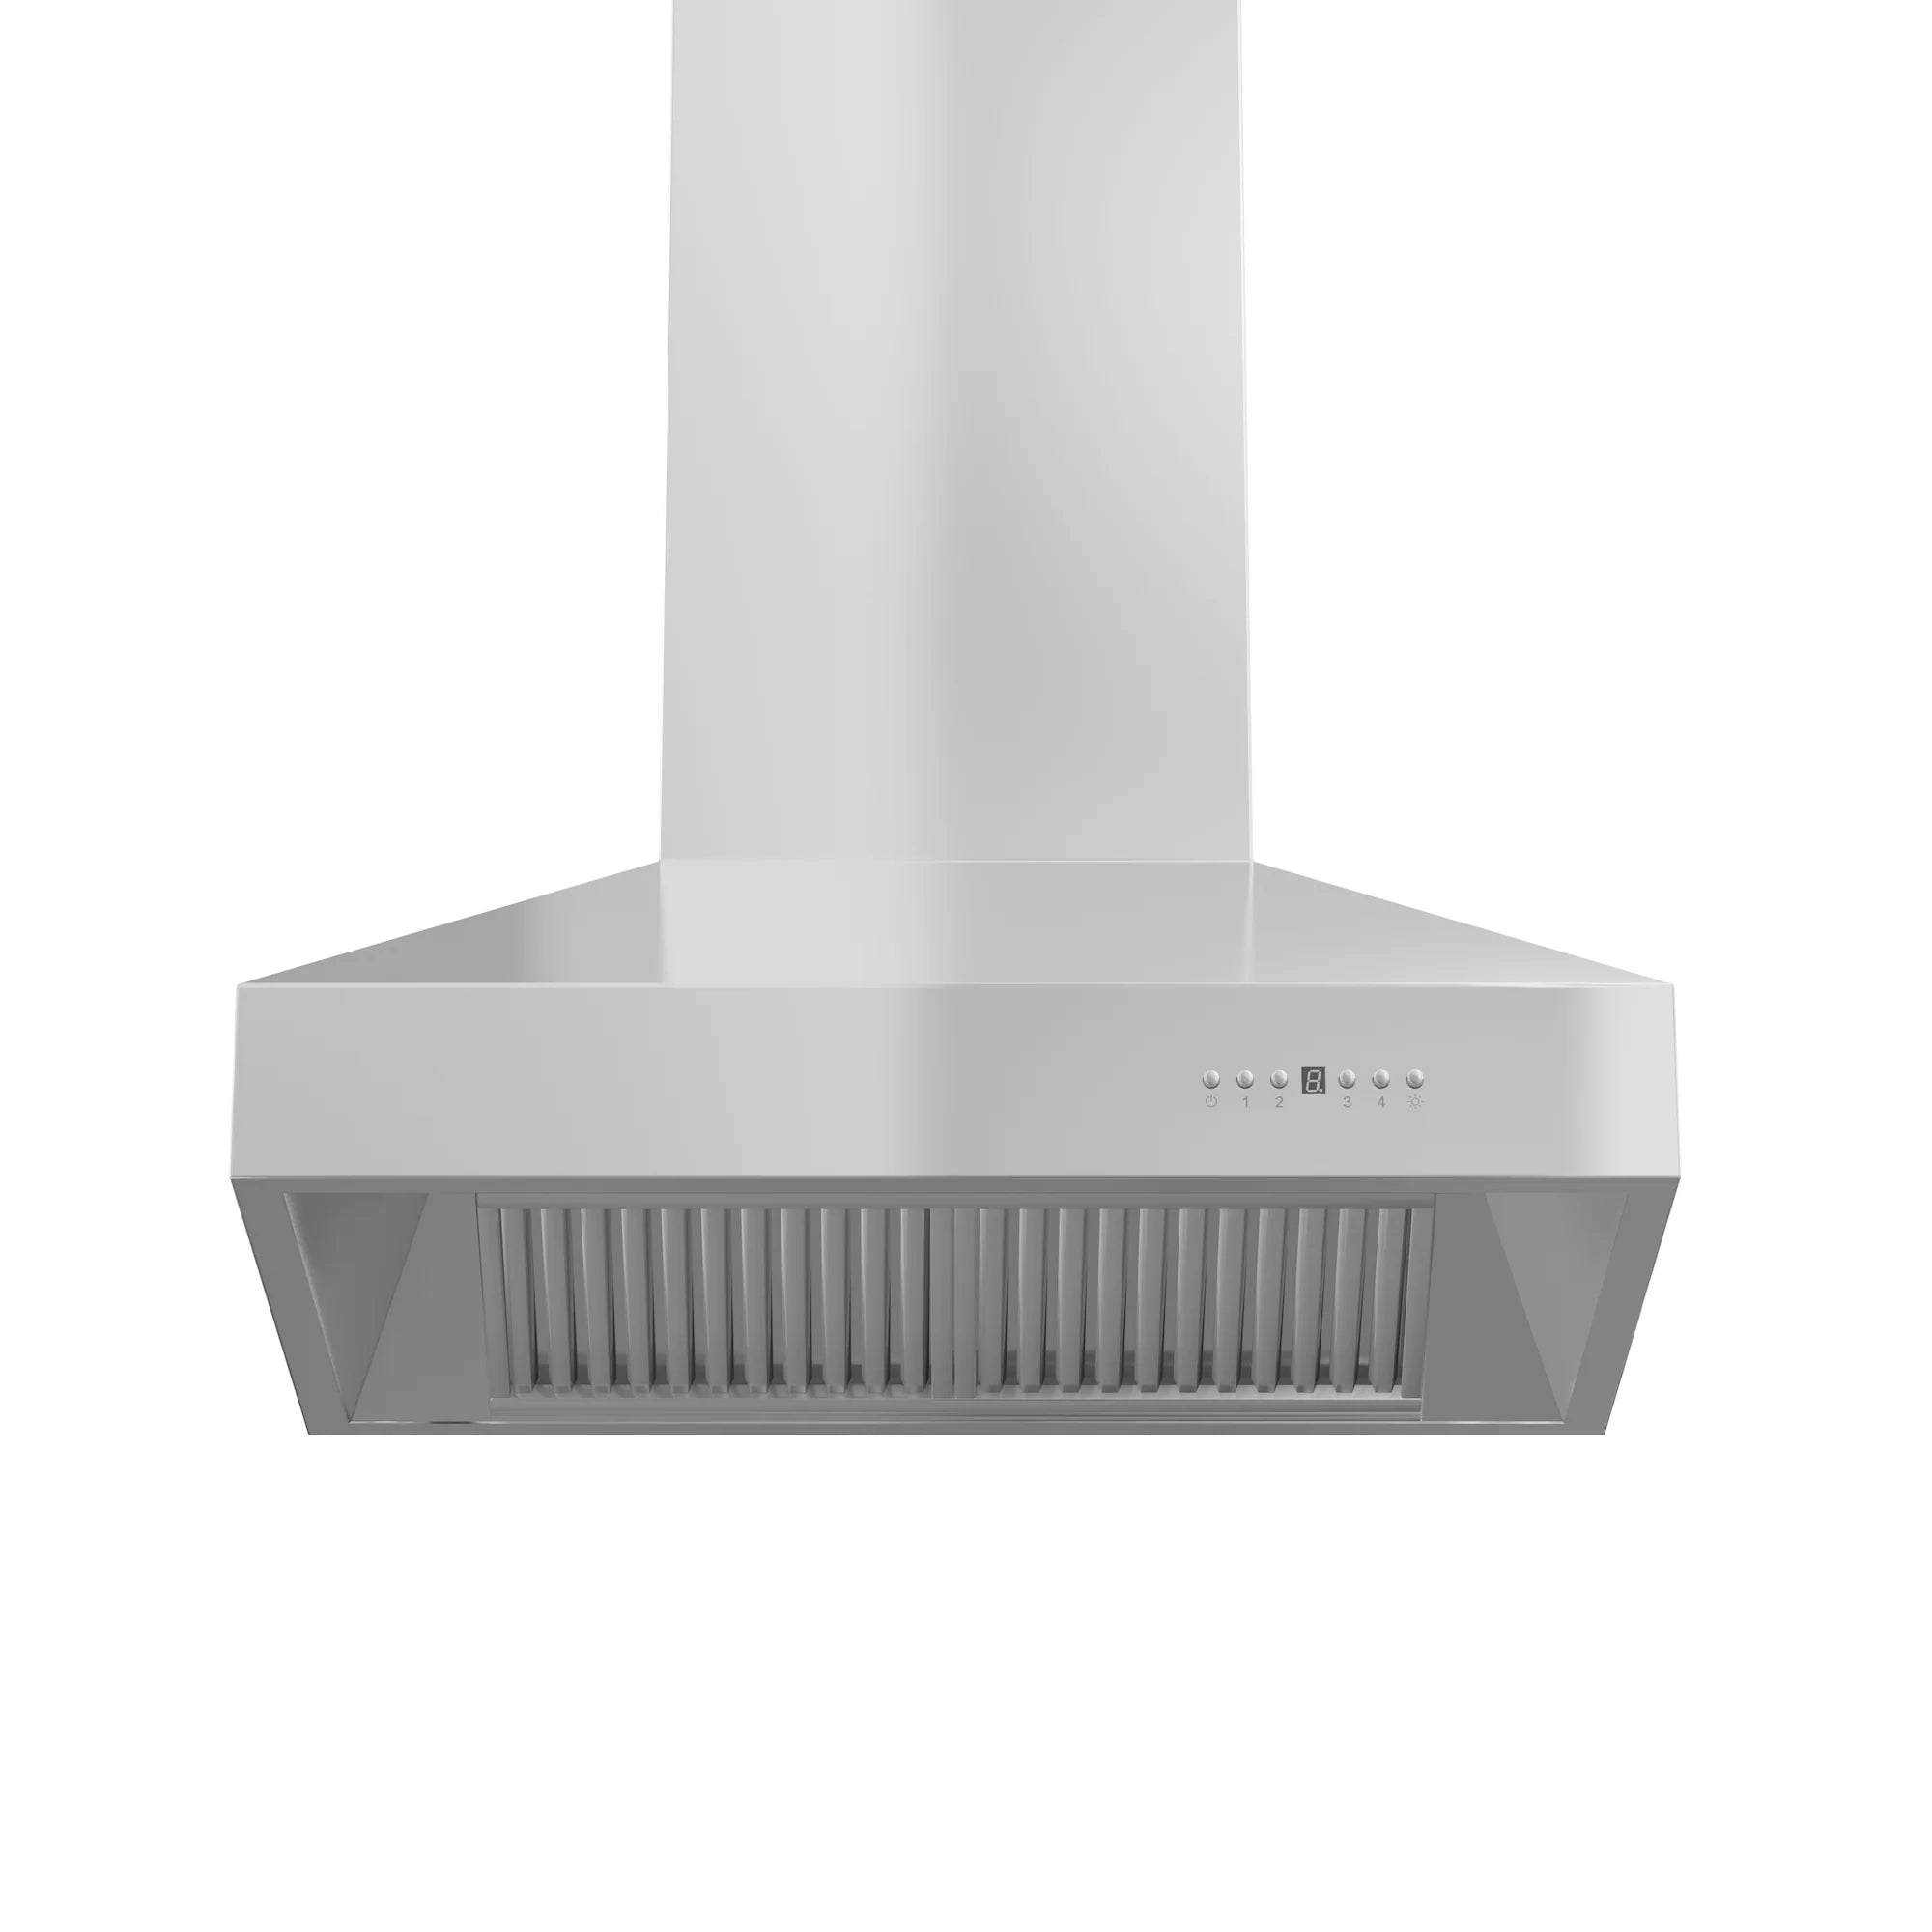 ZLINE 30" Ducted Wall Mount Range Hood with Single Remote Blower in Stainless Steel (697-RS-30-400)